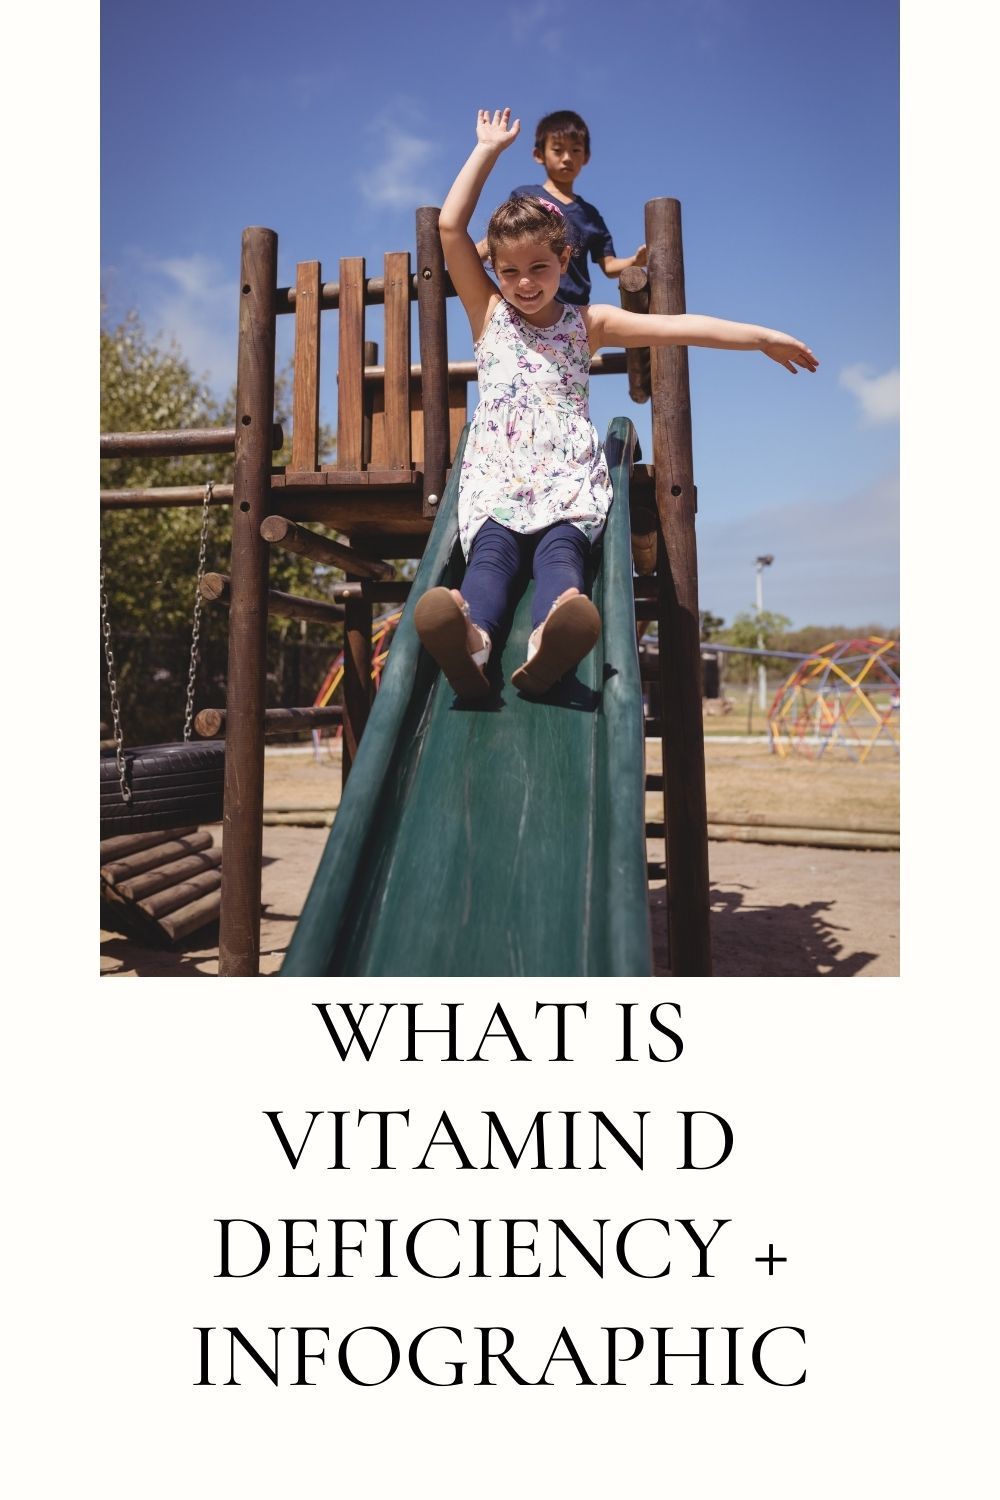 What is Vitamin D Deficiency + Infographic